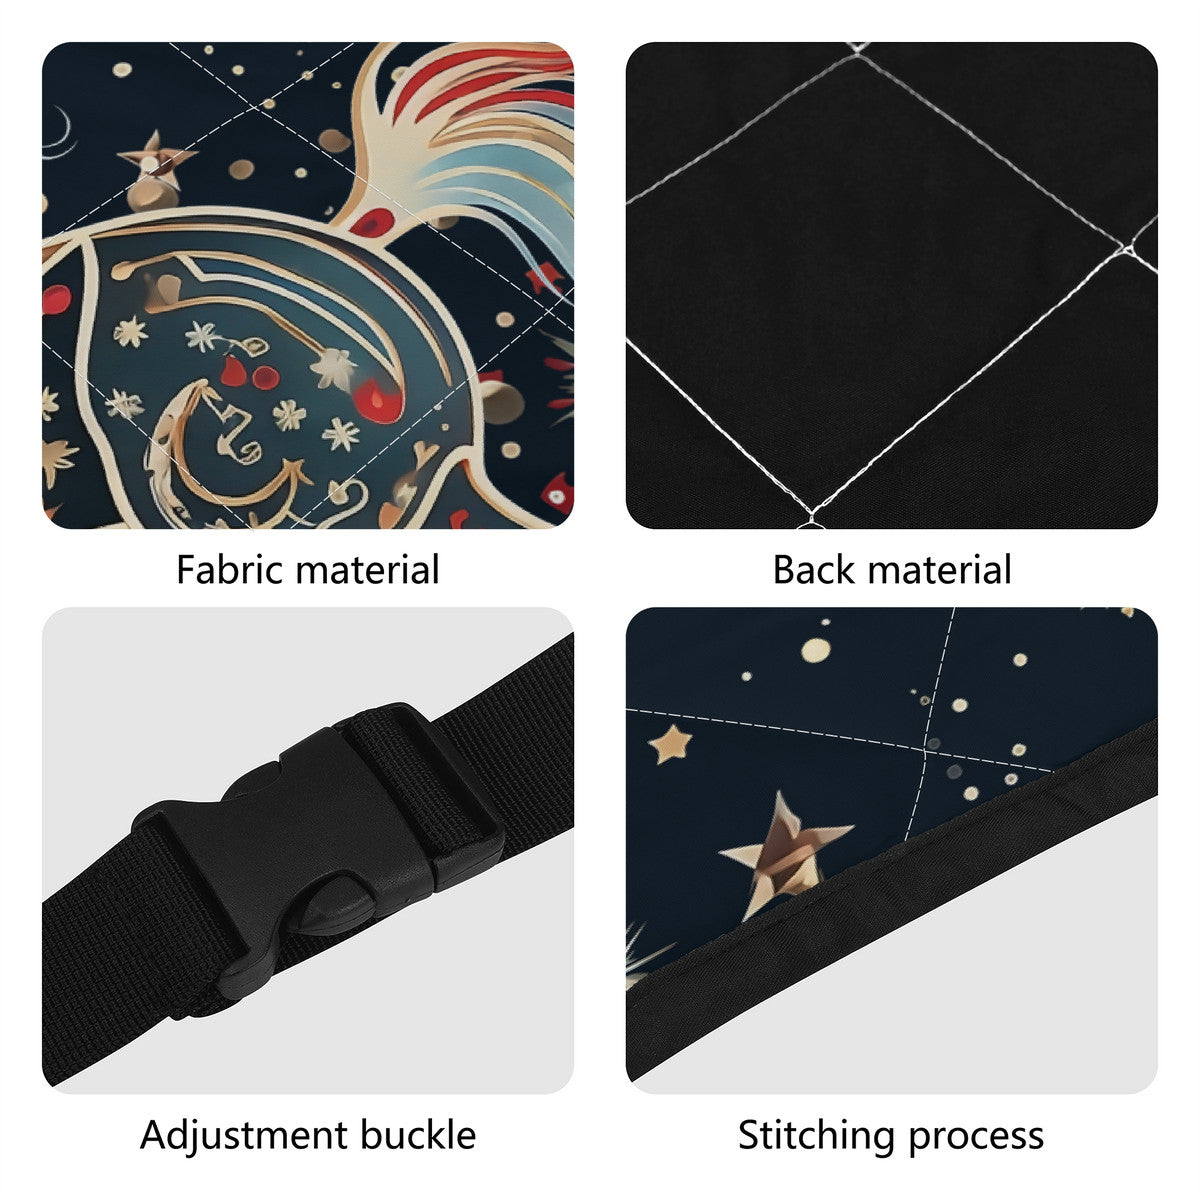 Car Pet Seat Cover - Starry Horse